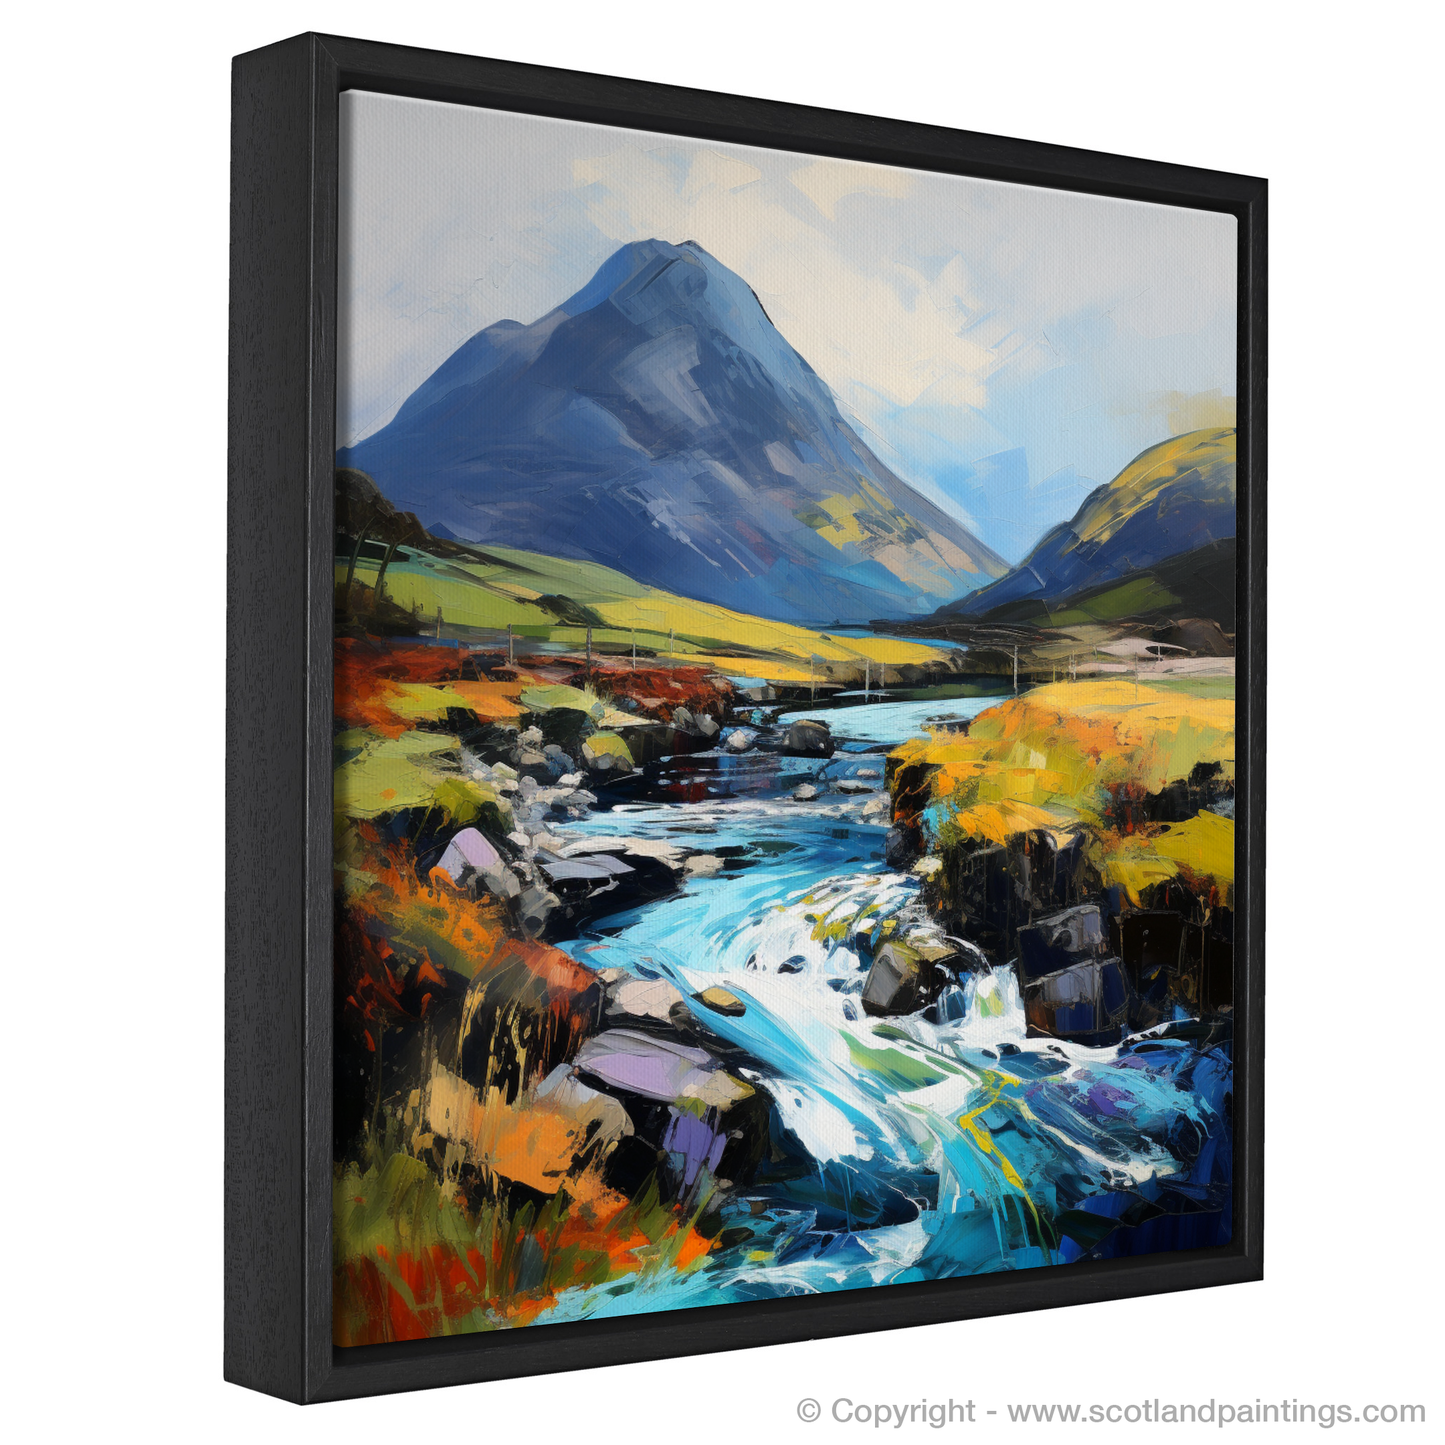 Painting and Art Print of Glen Sannox, Isle of Arran entitled "Captivating Glen Sannox: An Expressionist Ode to the Scottish Highlands".